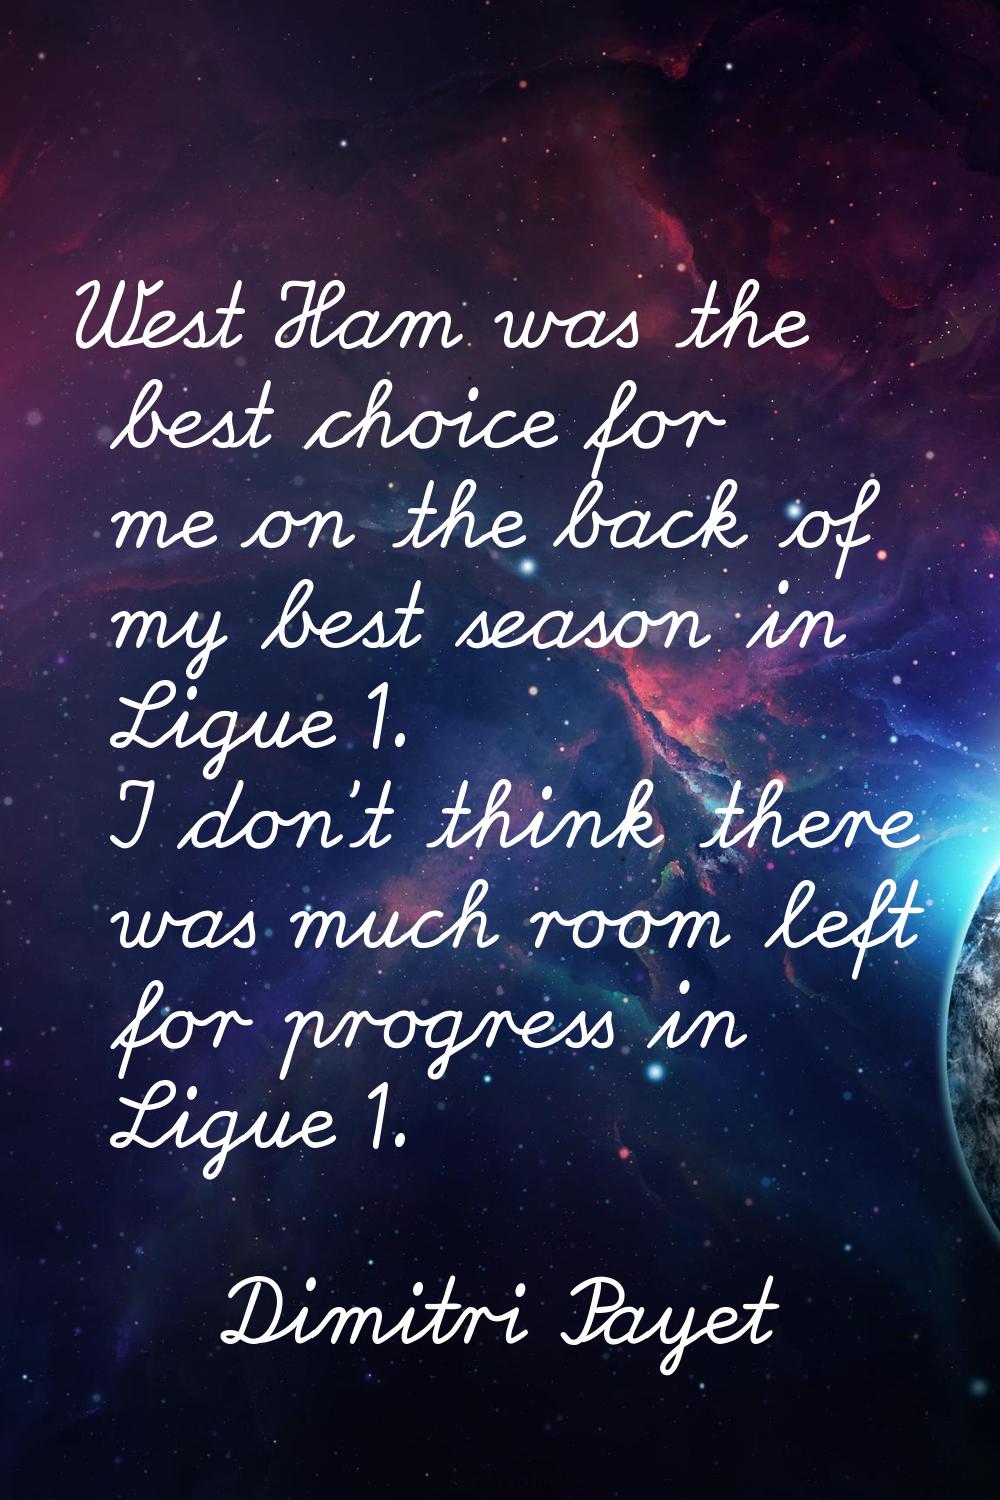 West Ham was the best choice for me on the back of my best season in Ligue 1. I don't think there w